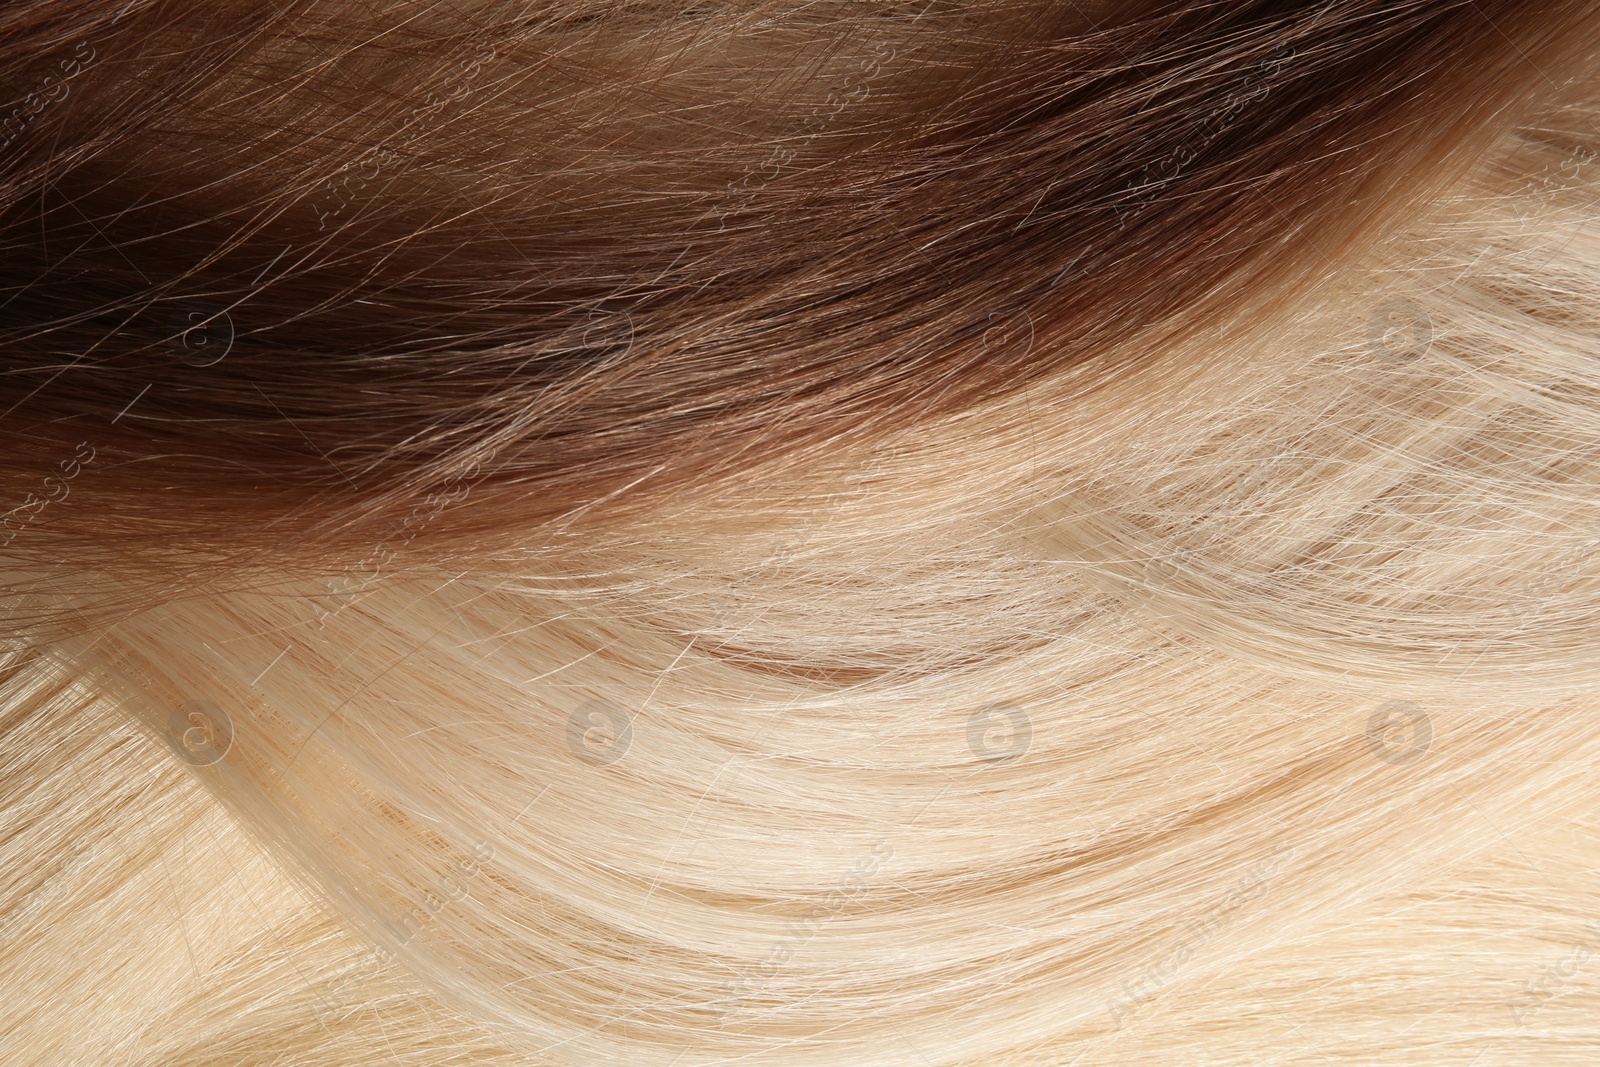 Photo of Strands of different color hair as background, closeup